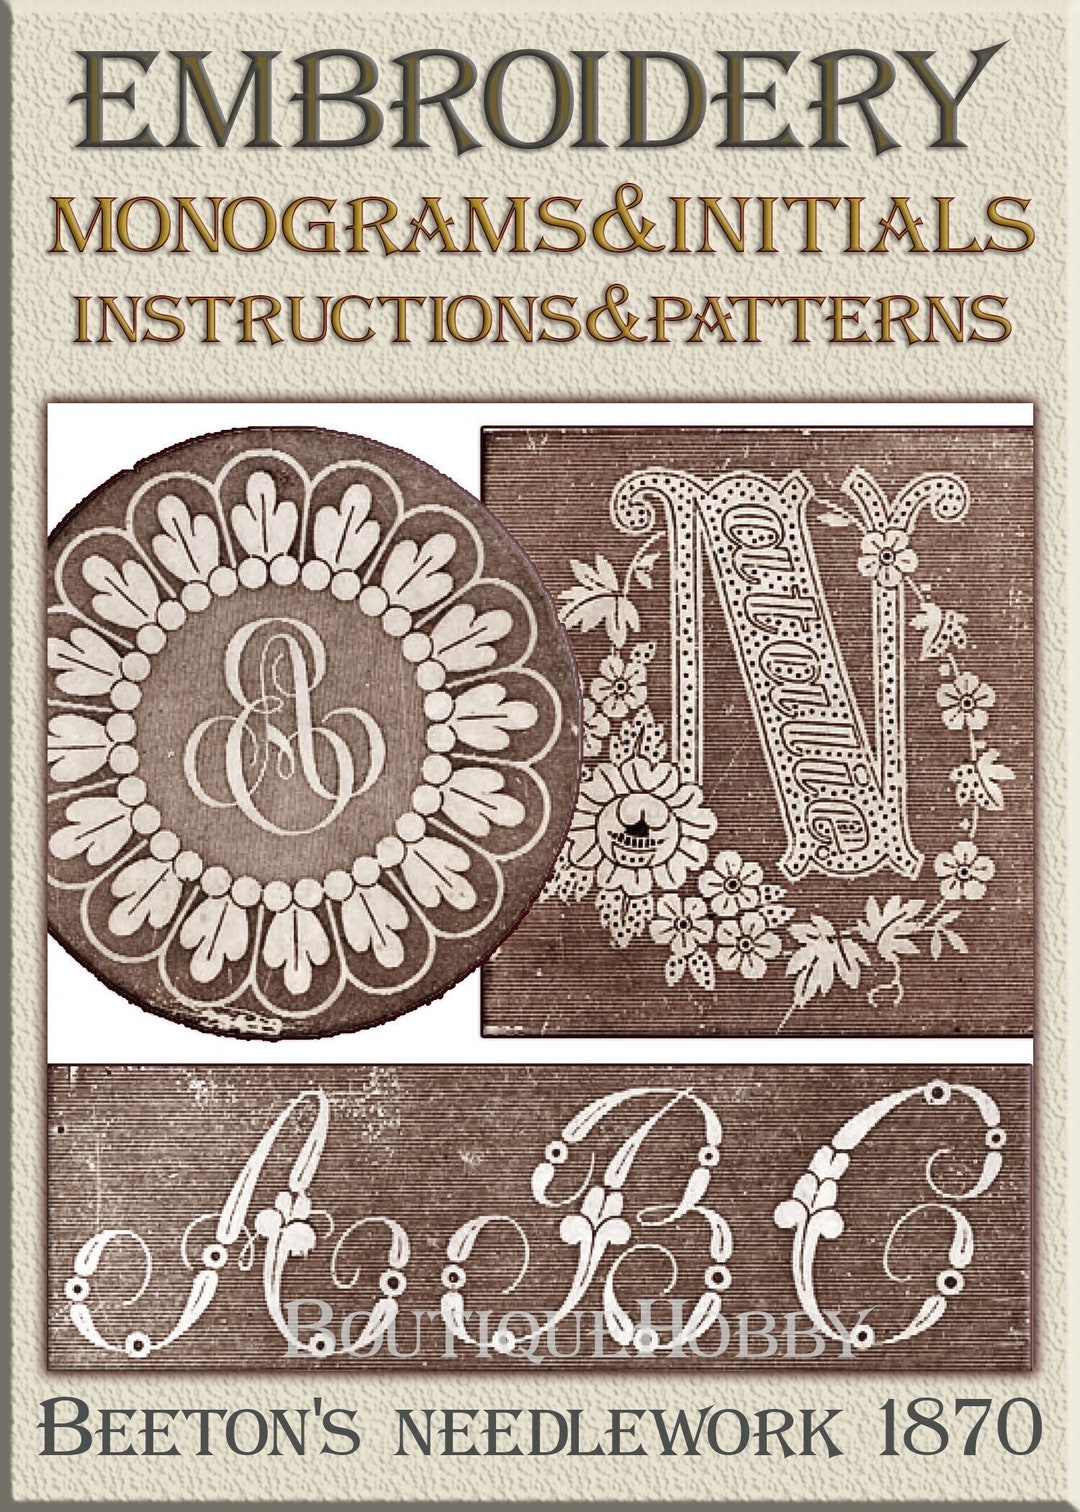 Hand Victorian Embroidery Designs Old Books PDF Book 500 Patterns